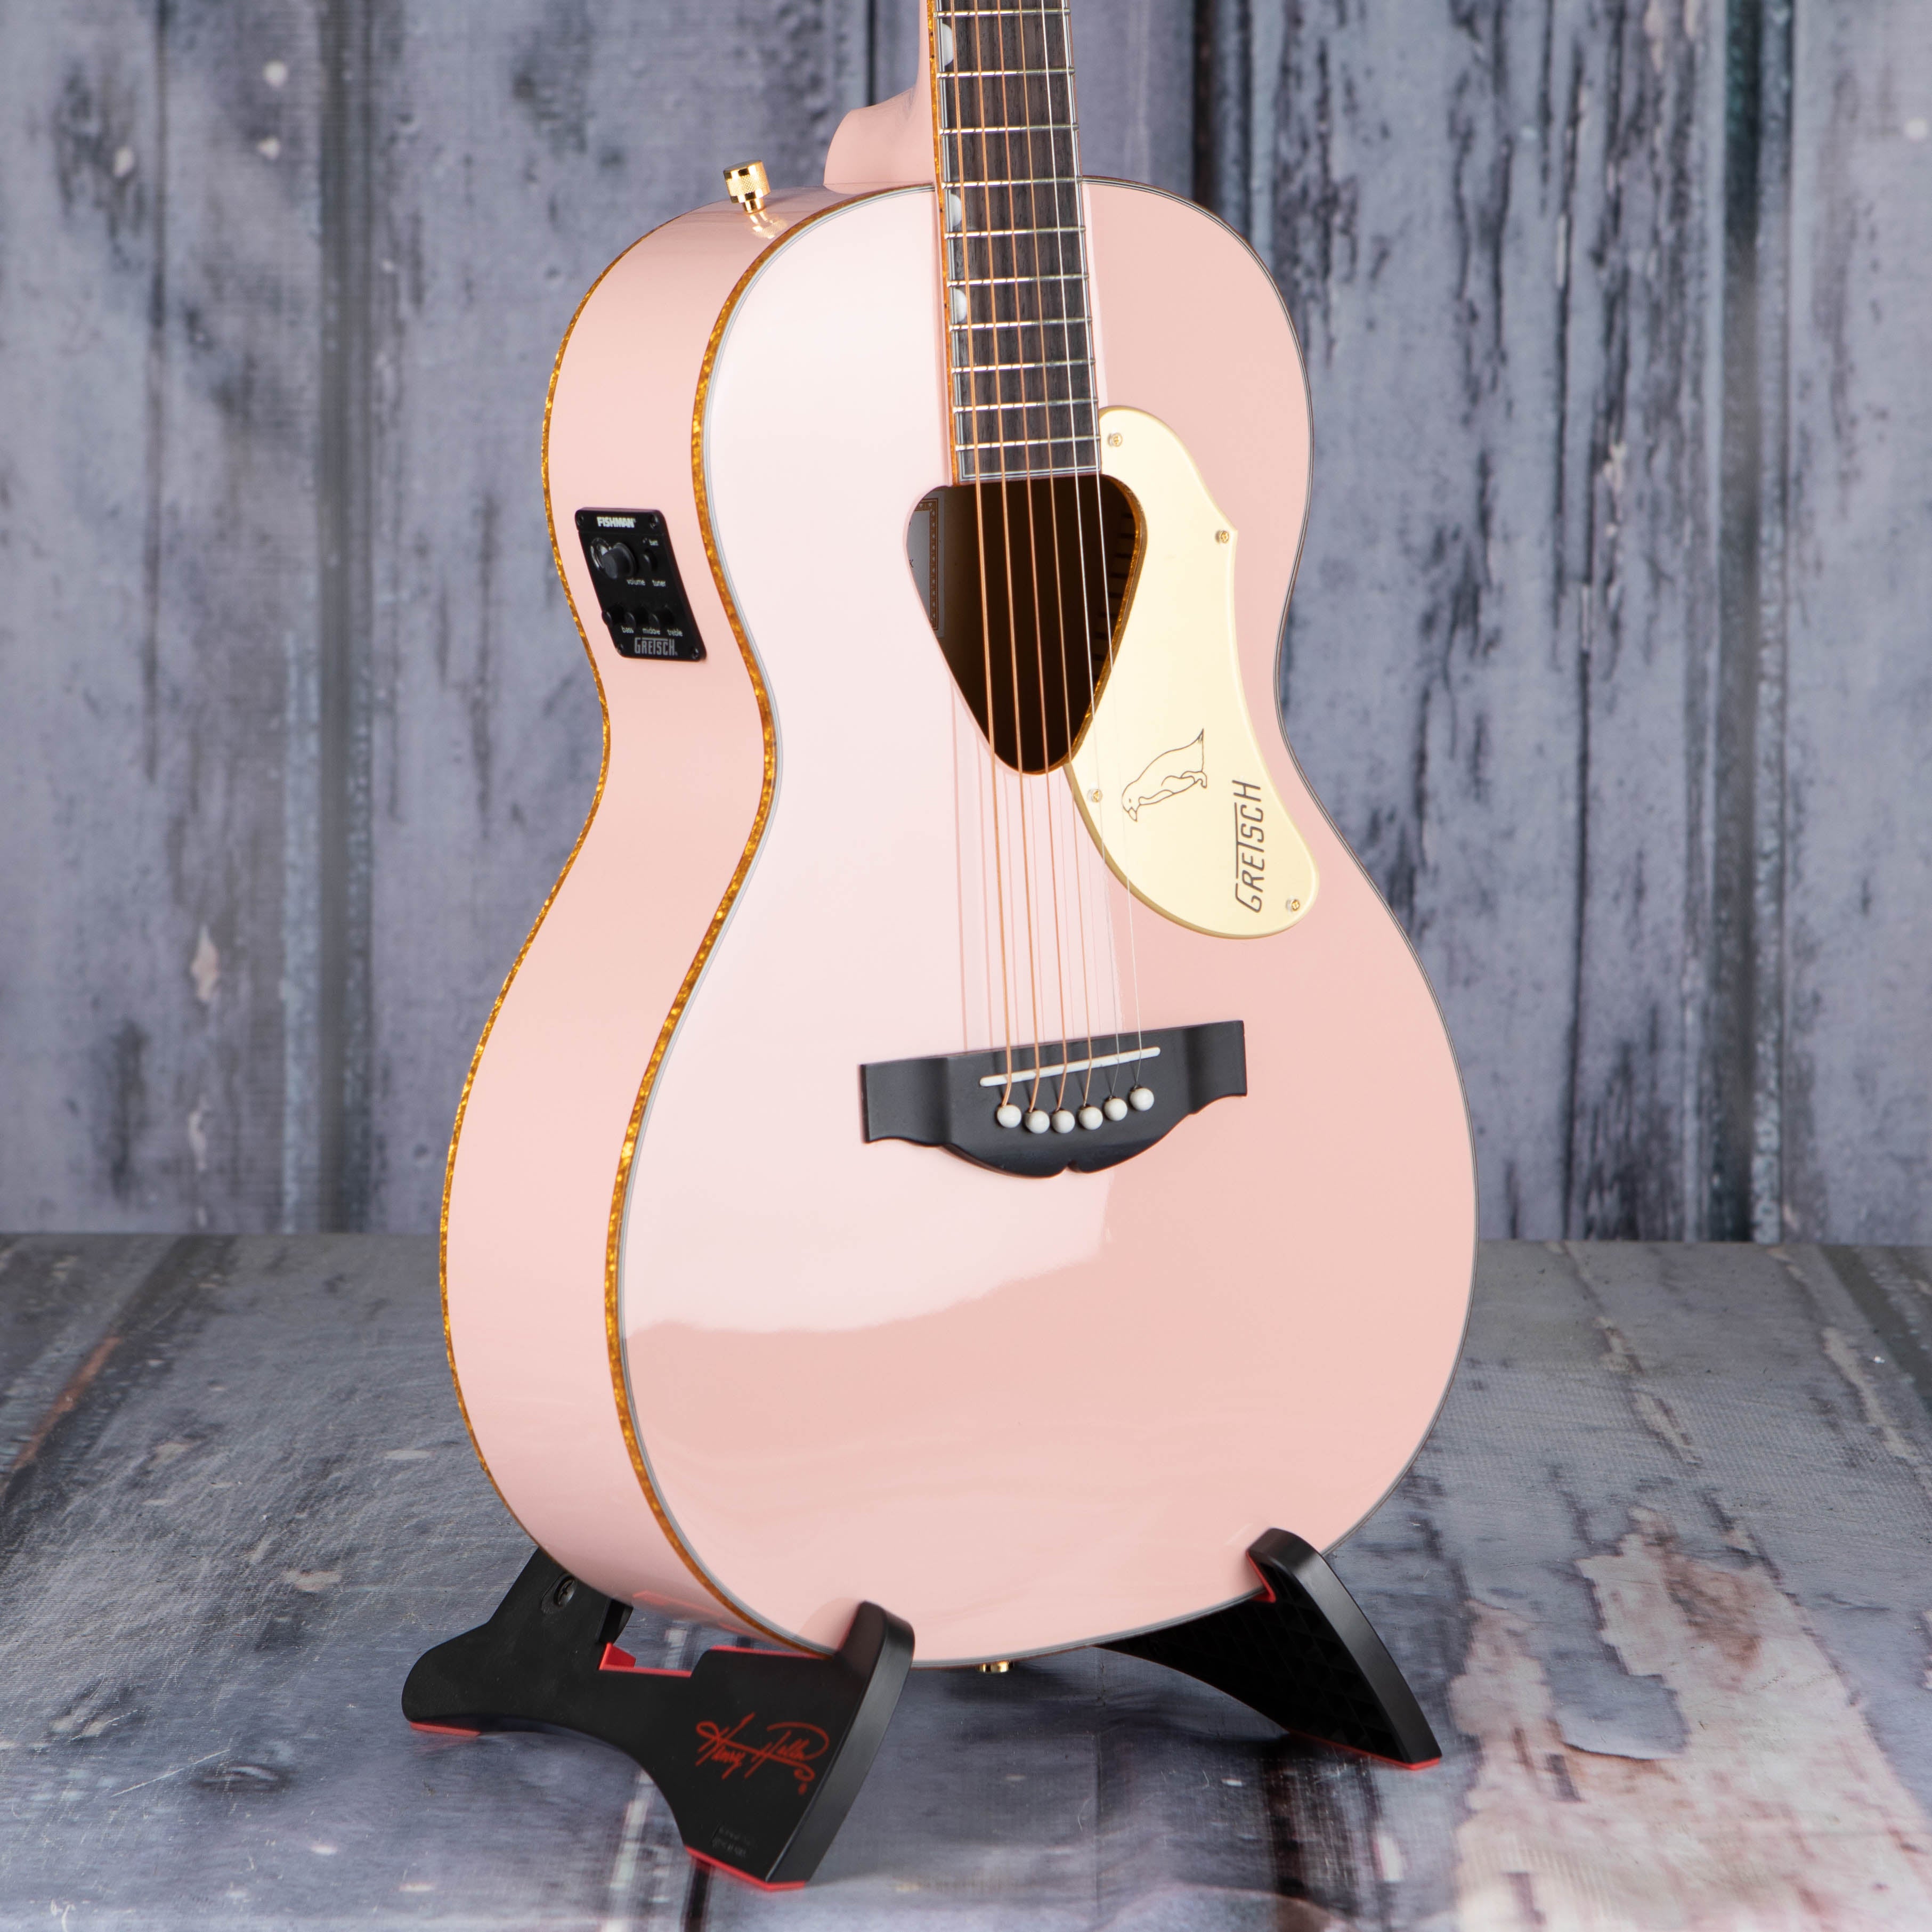 Gretsch G5021E Rancher Penguin Parlor Acoustic/Electric Guitar, Shell Pink, angle